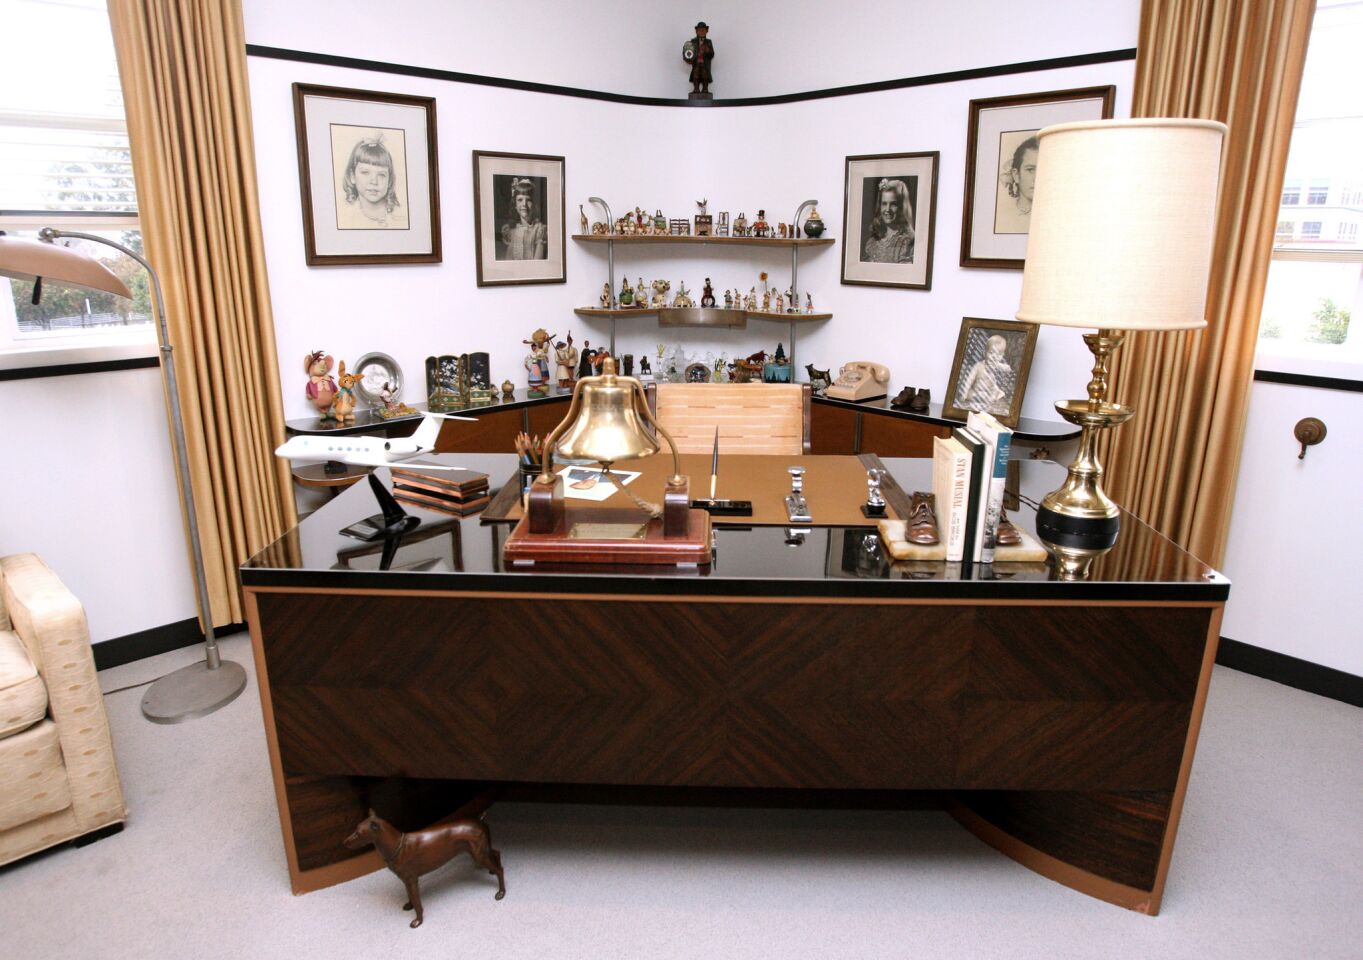 To celebrate the 75th anniversary of the Walt Disney Studios in Burbank, the Walt Disney Archives restored Walt Disney's original office suite, which was shown to members of the media on Tuesday, December 22, 2015. The space is located in the original Animation building and was occupied by Walt Disney from 1940 to 1966, when he passed away at the age of 65 from lung cancer. The permanent exhibit will be opened to Disney employees, cast members and studio visitors and it will be added to tours of the studio lot that gold members of the official fan club, D23, can take.